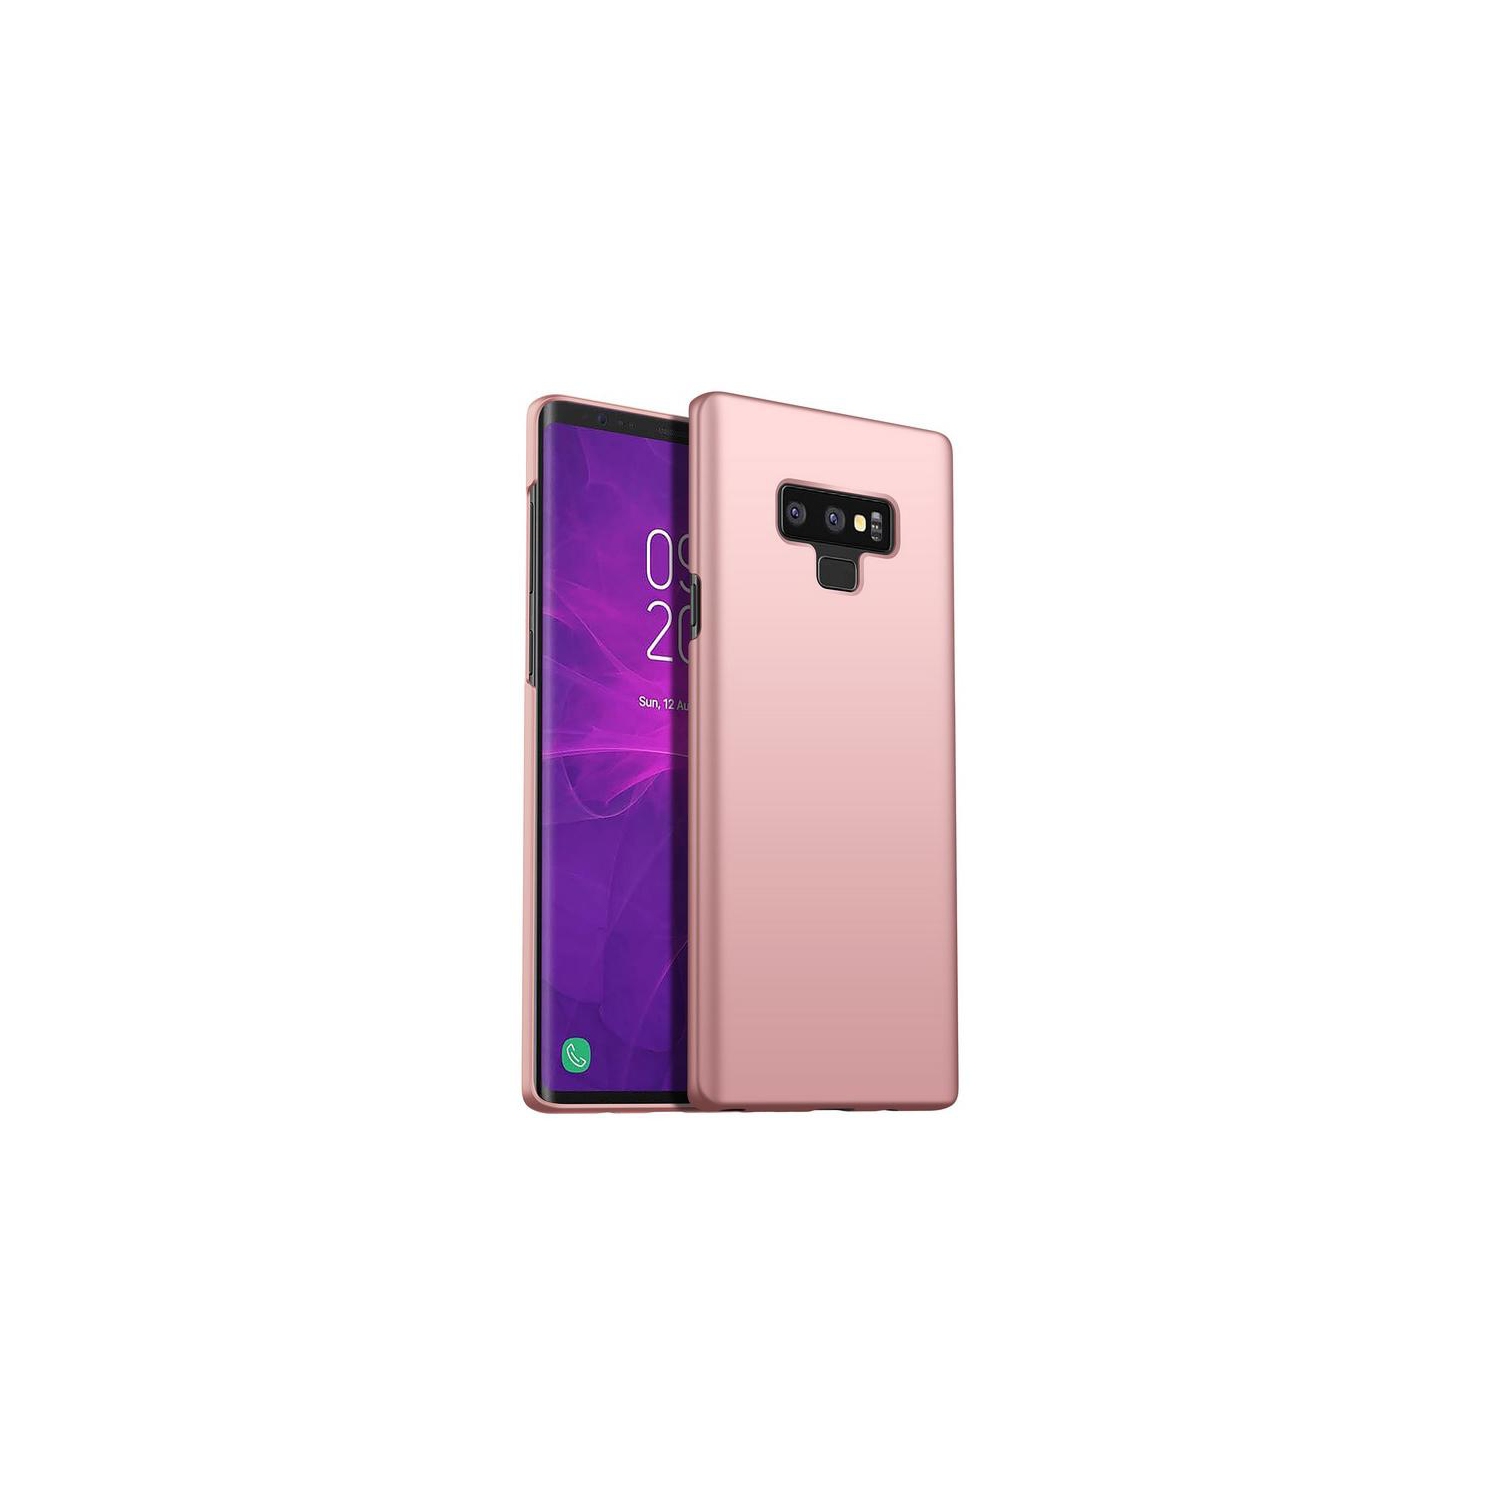 PANDACO Hard Shell Rose Gold Case for Samsung Galaxy Note 9